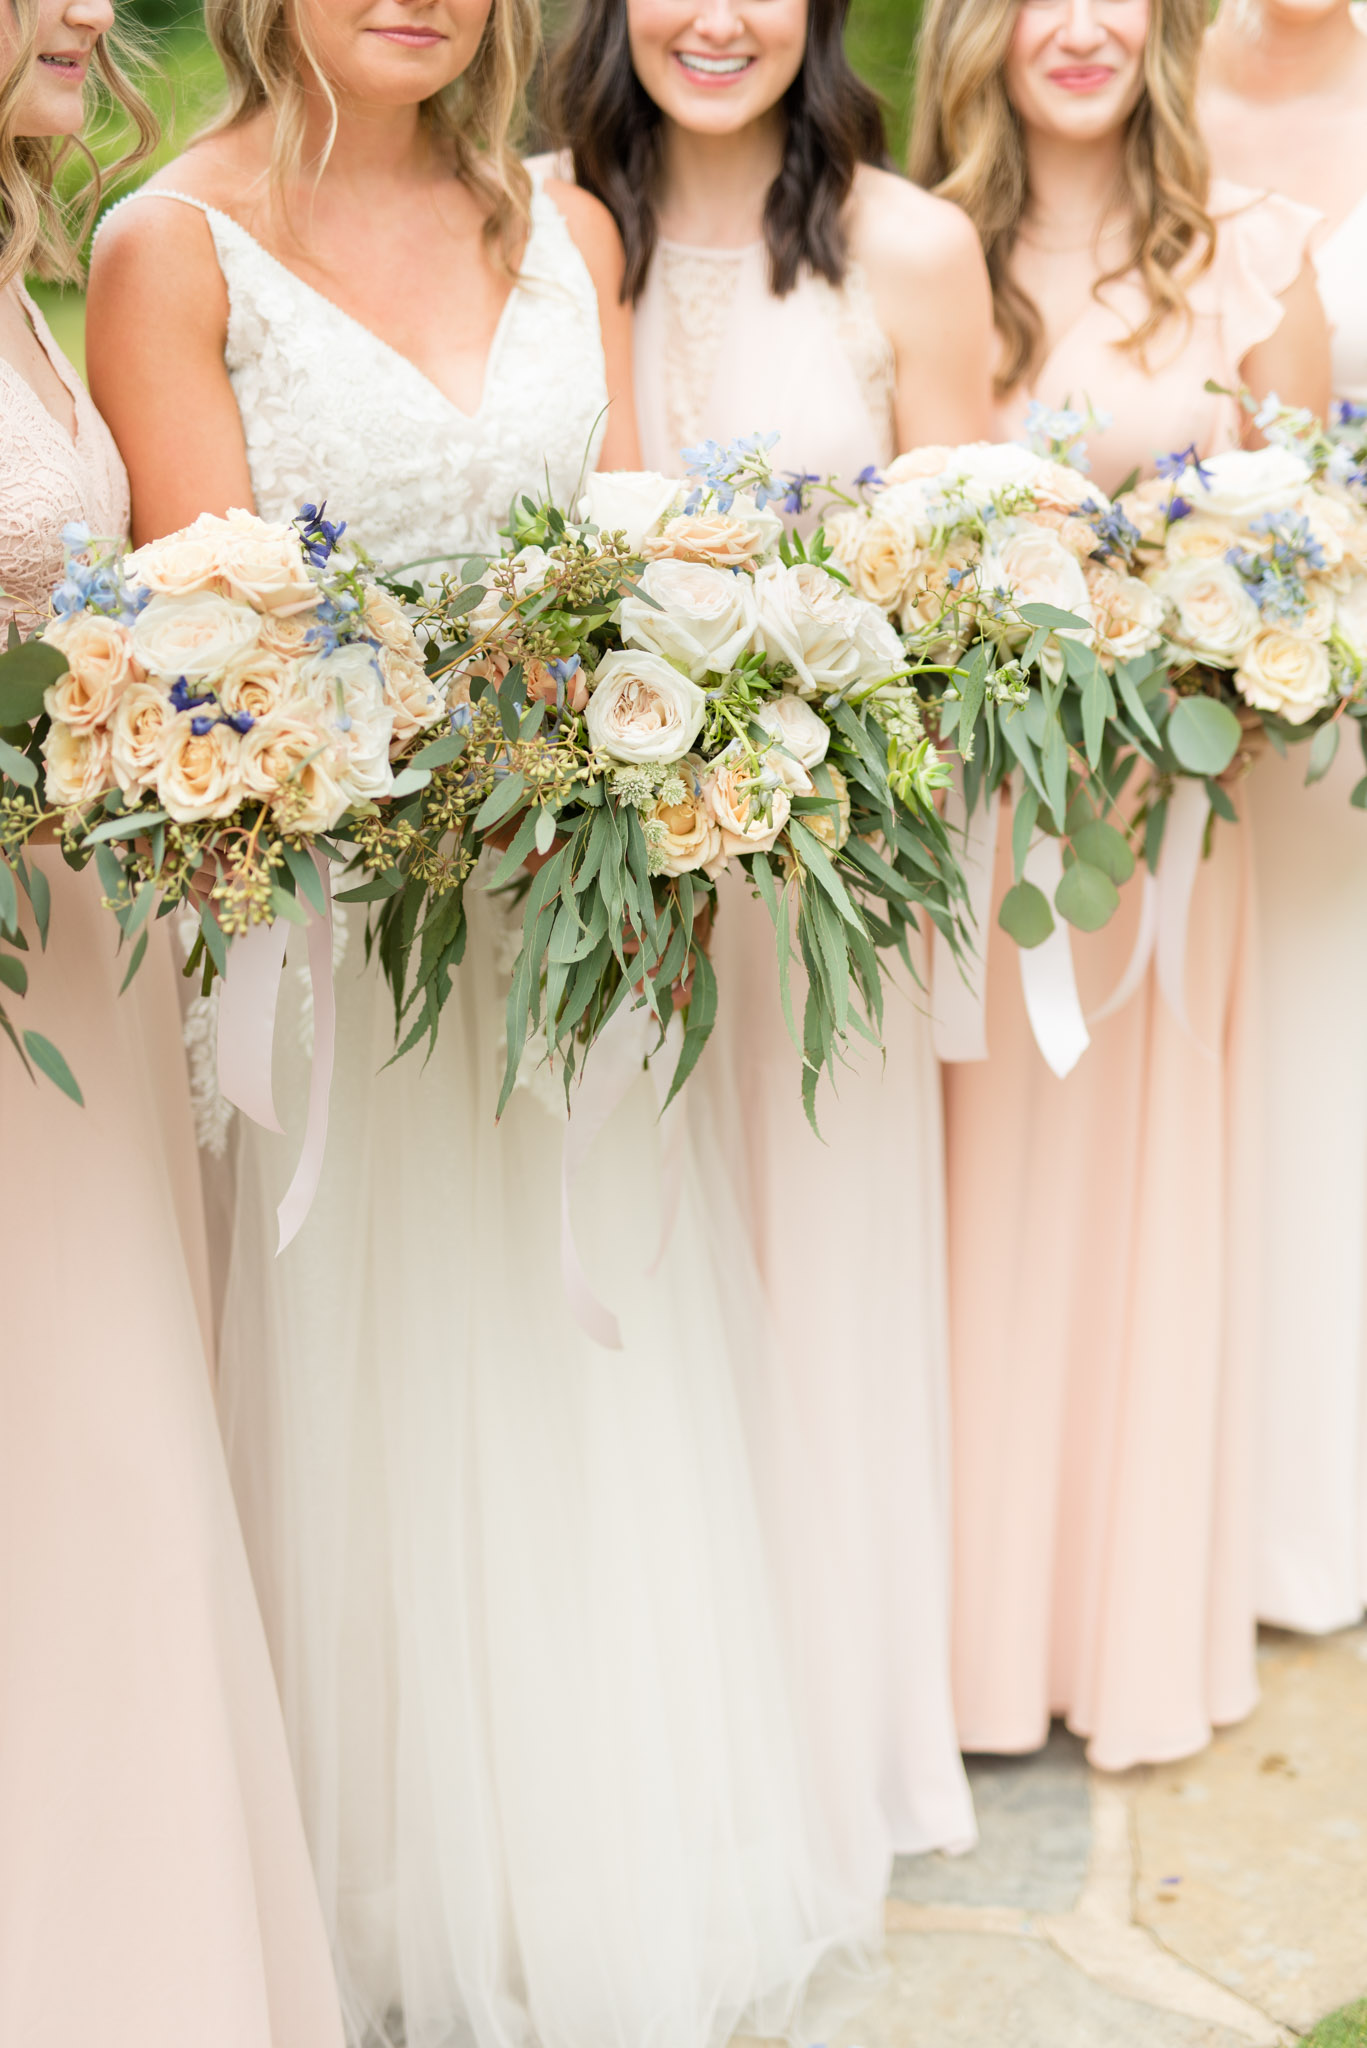 Bride and bridesmaids hold bouquets.